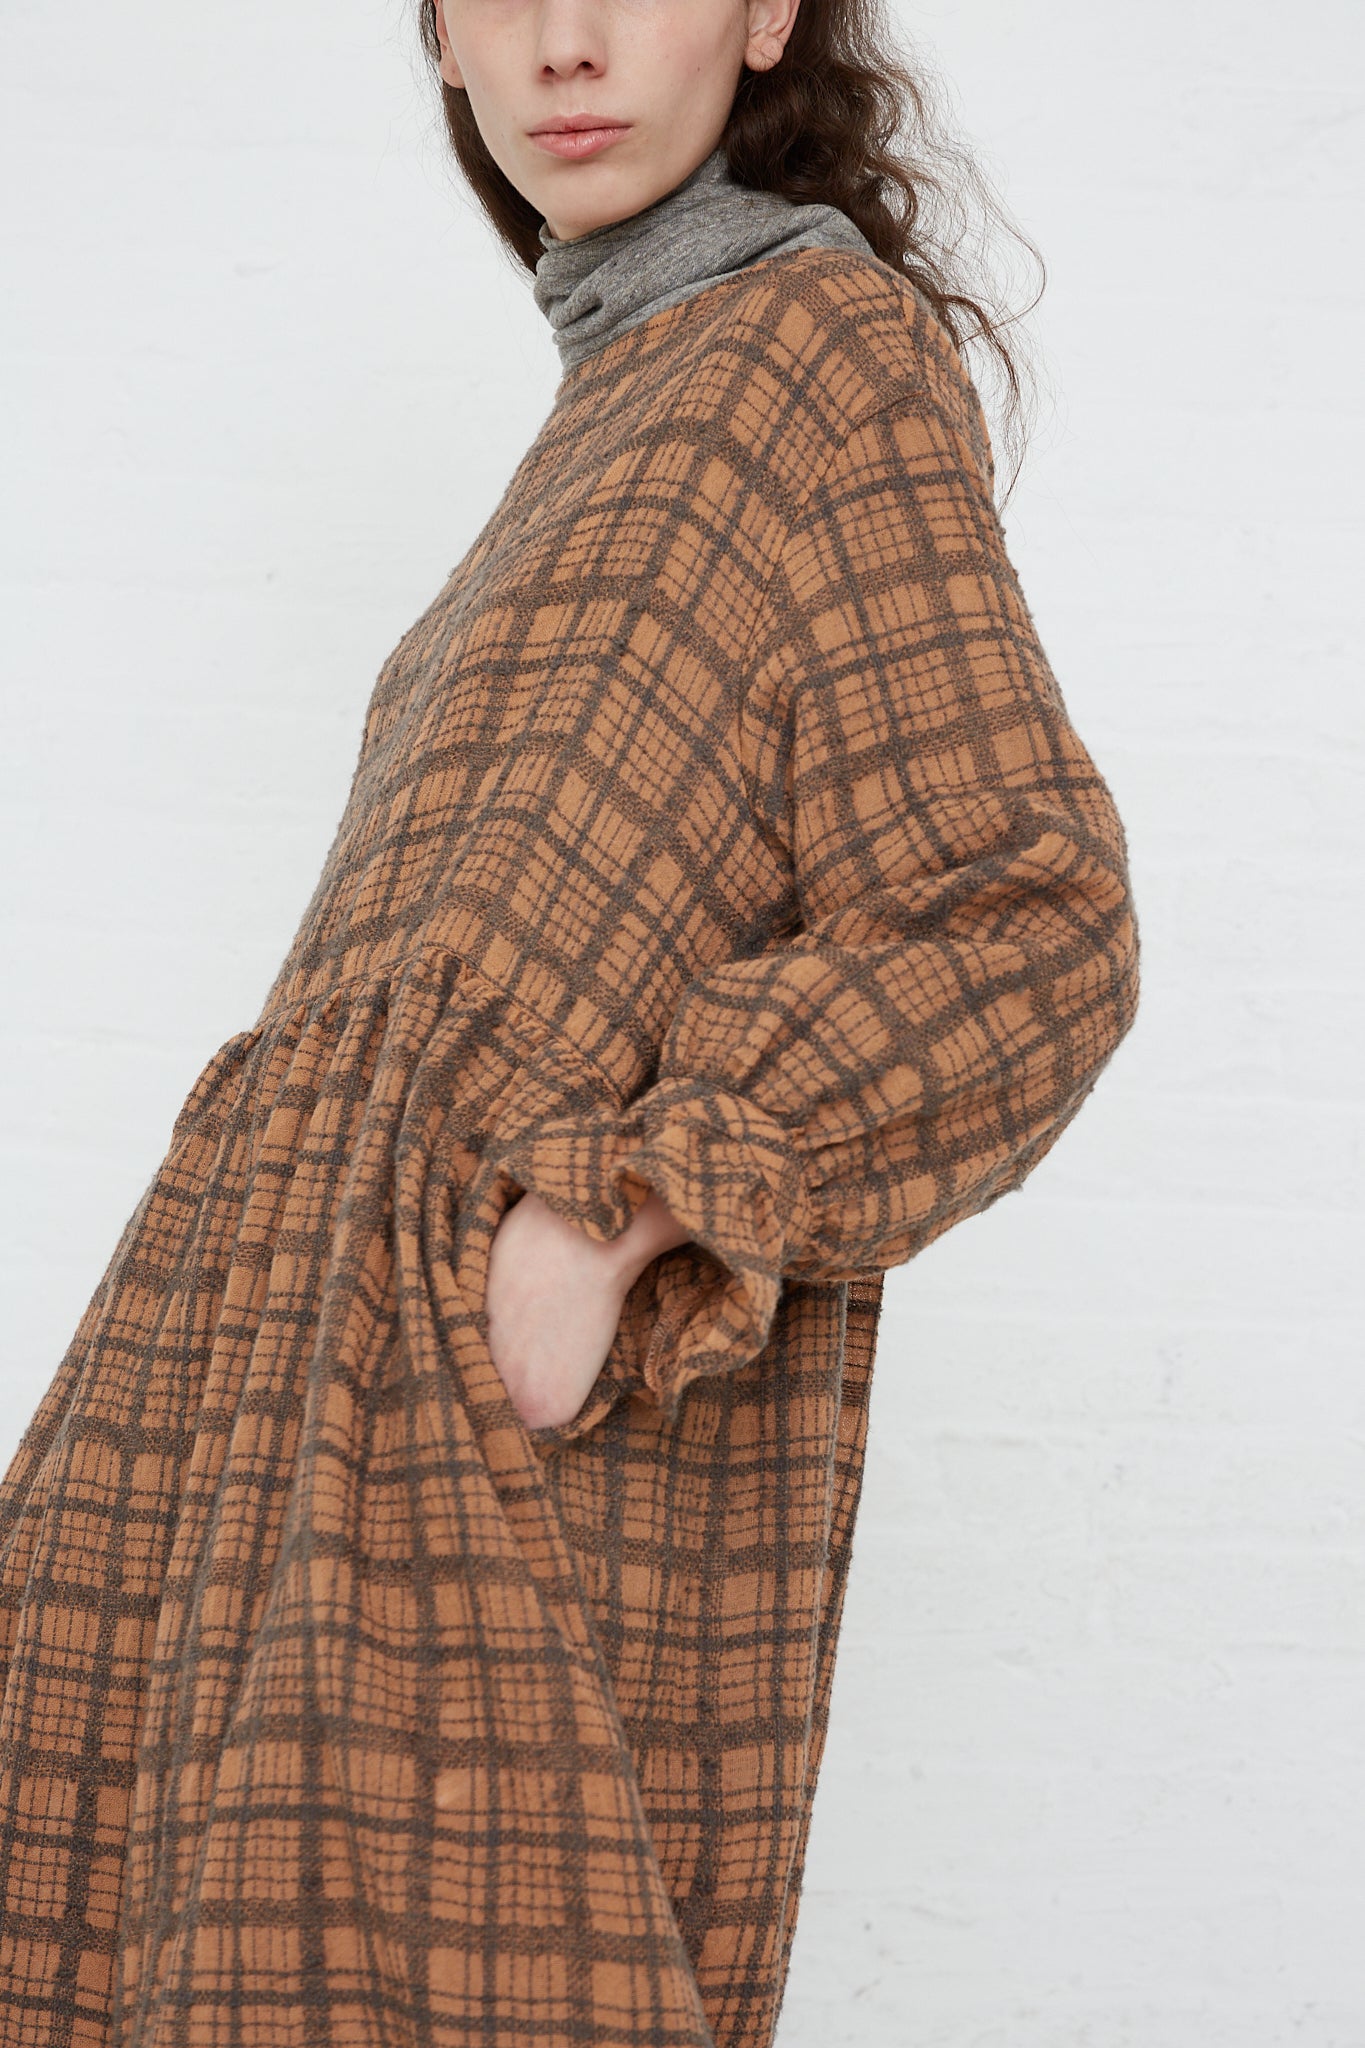 The model is wearing a Ichi Antiquités Woven Wool Check Dress in Terracotta.